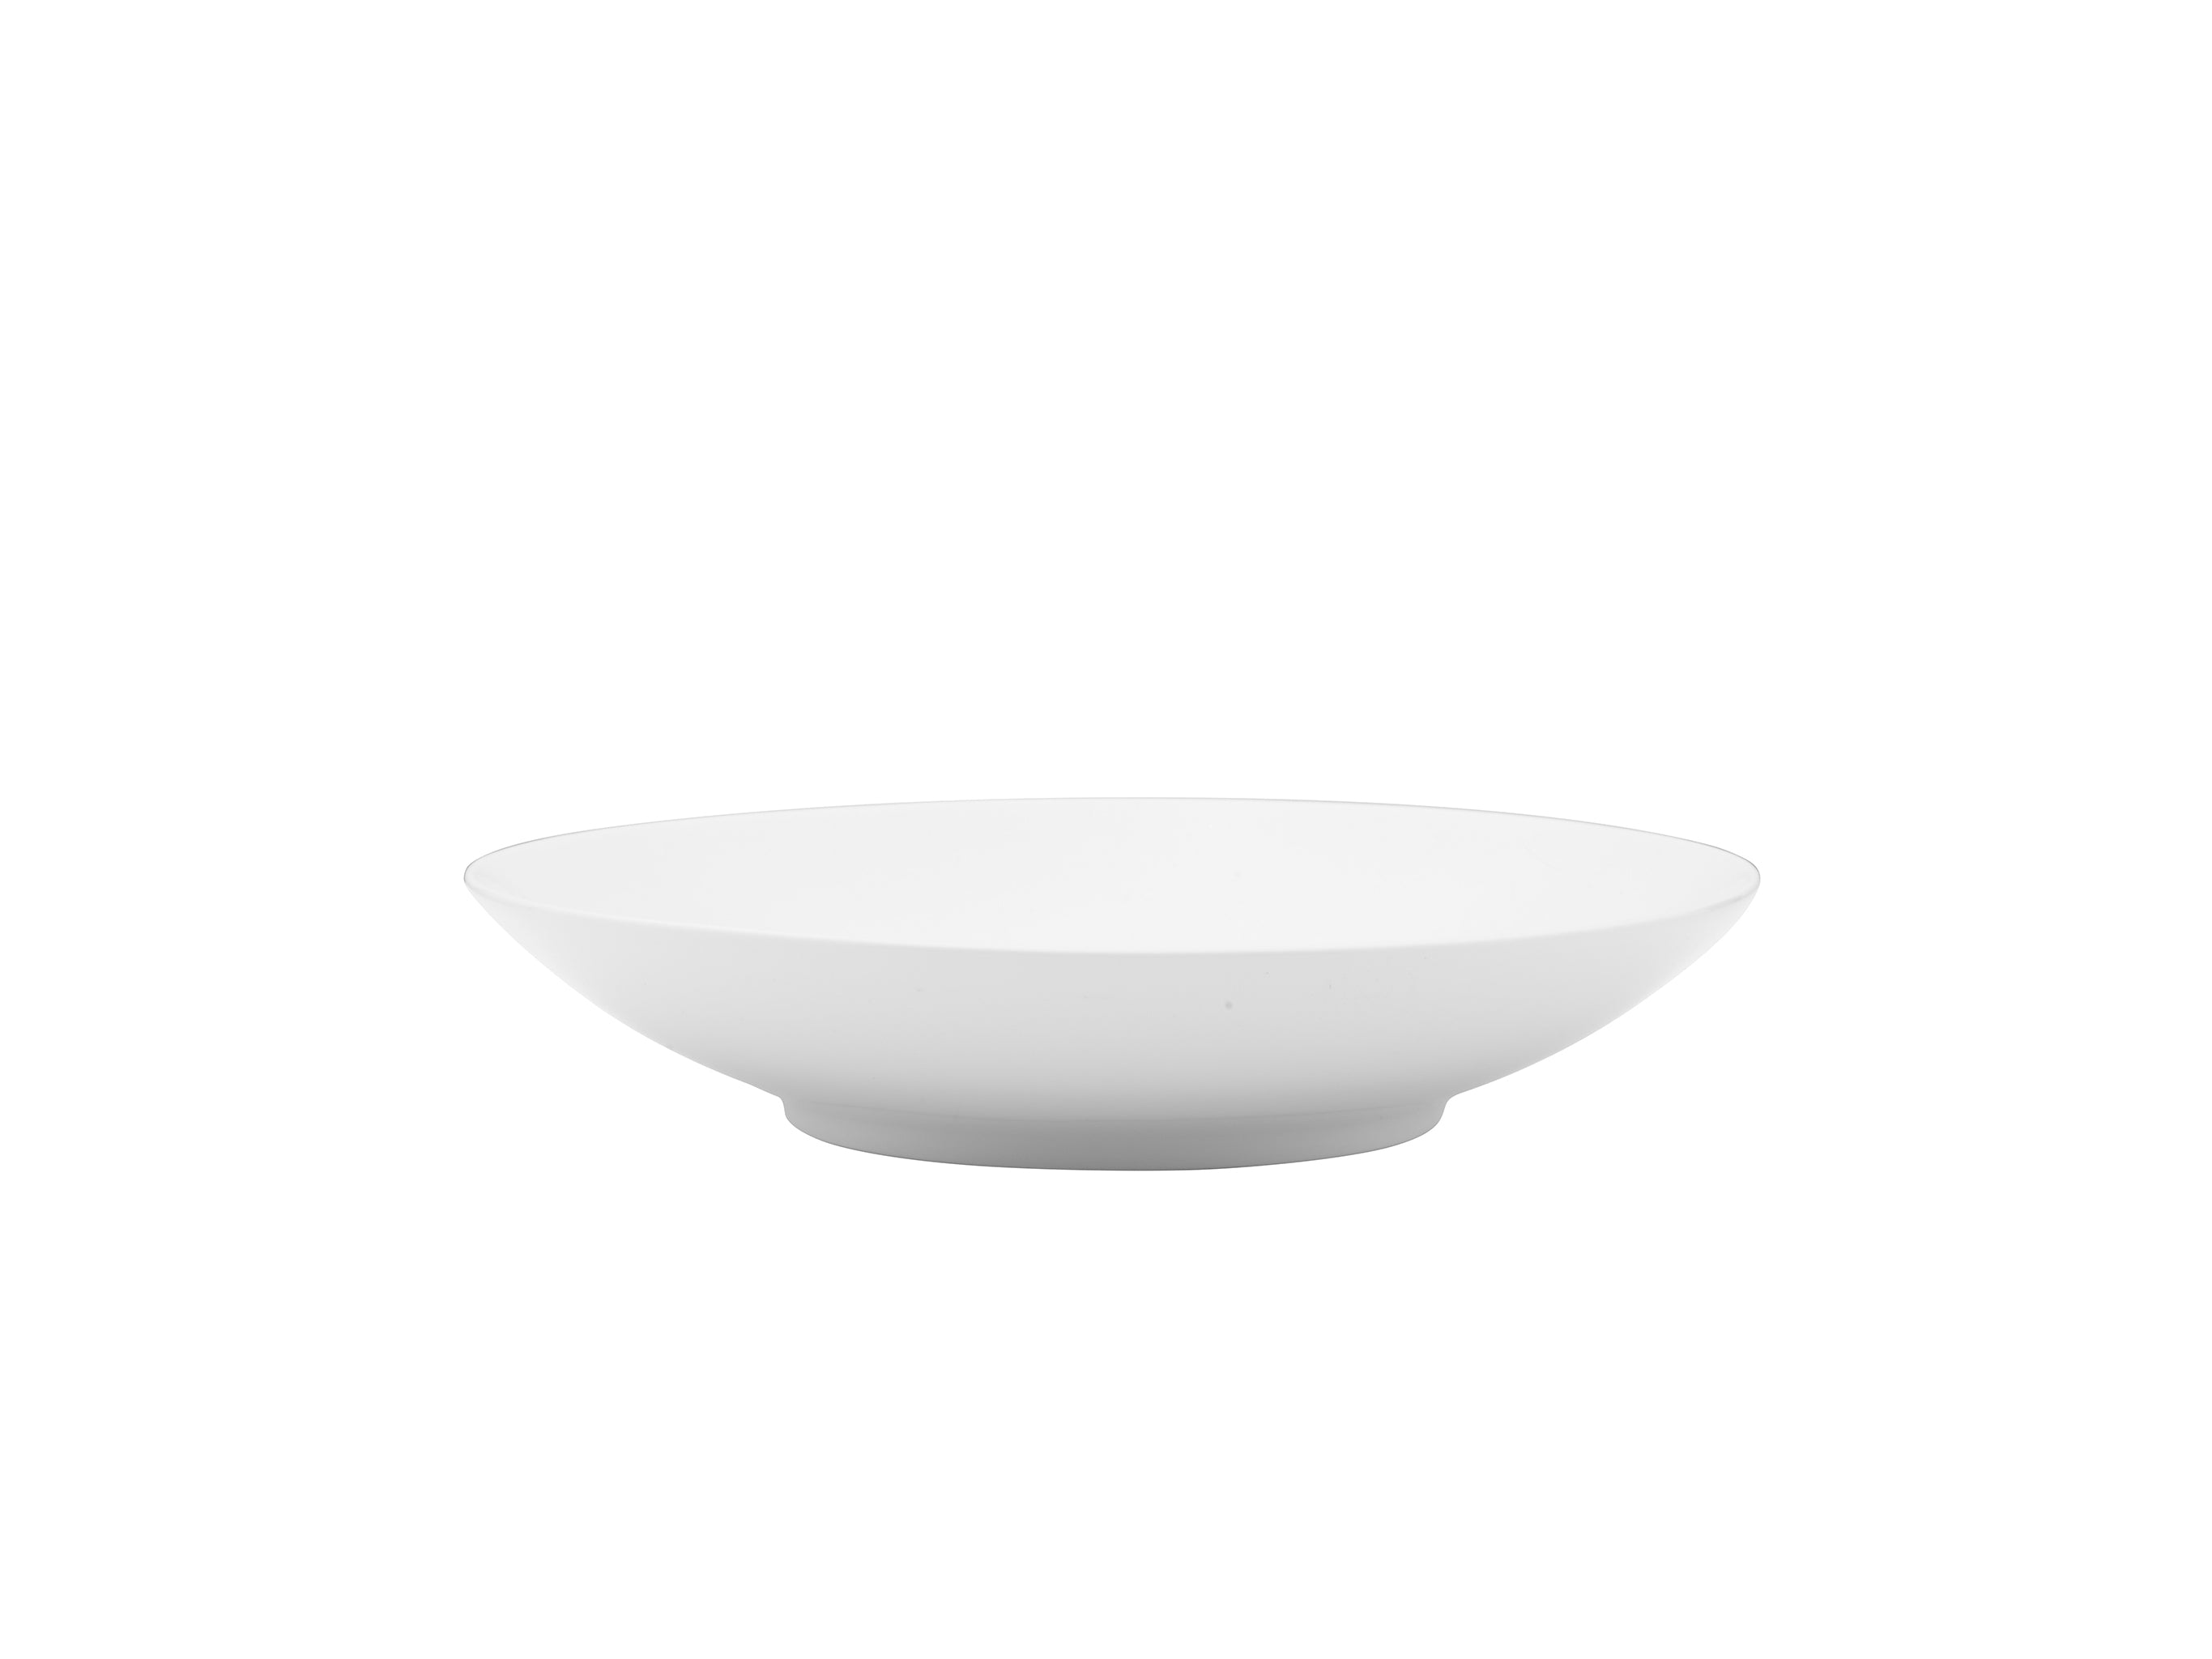 Galleria Porcelain Deep Coupe Plate 9.7" White